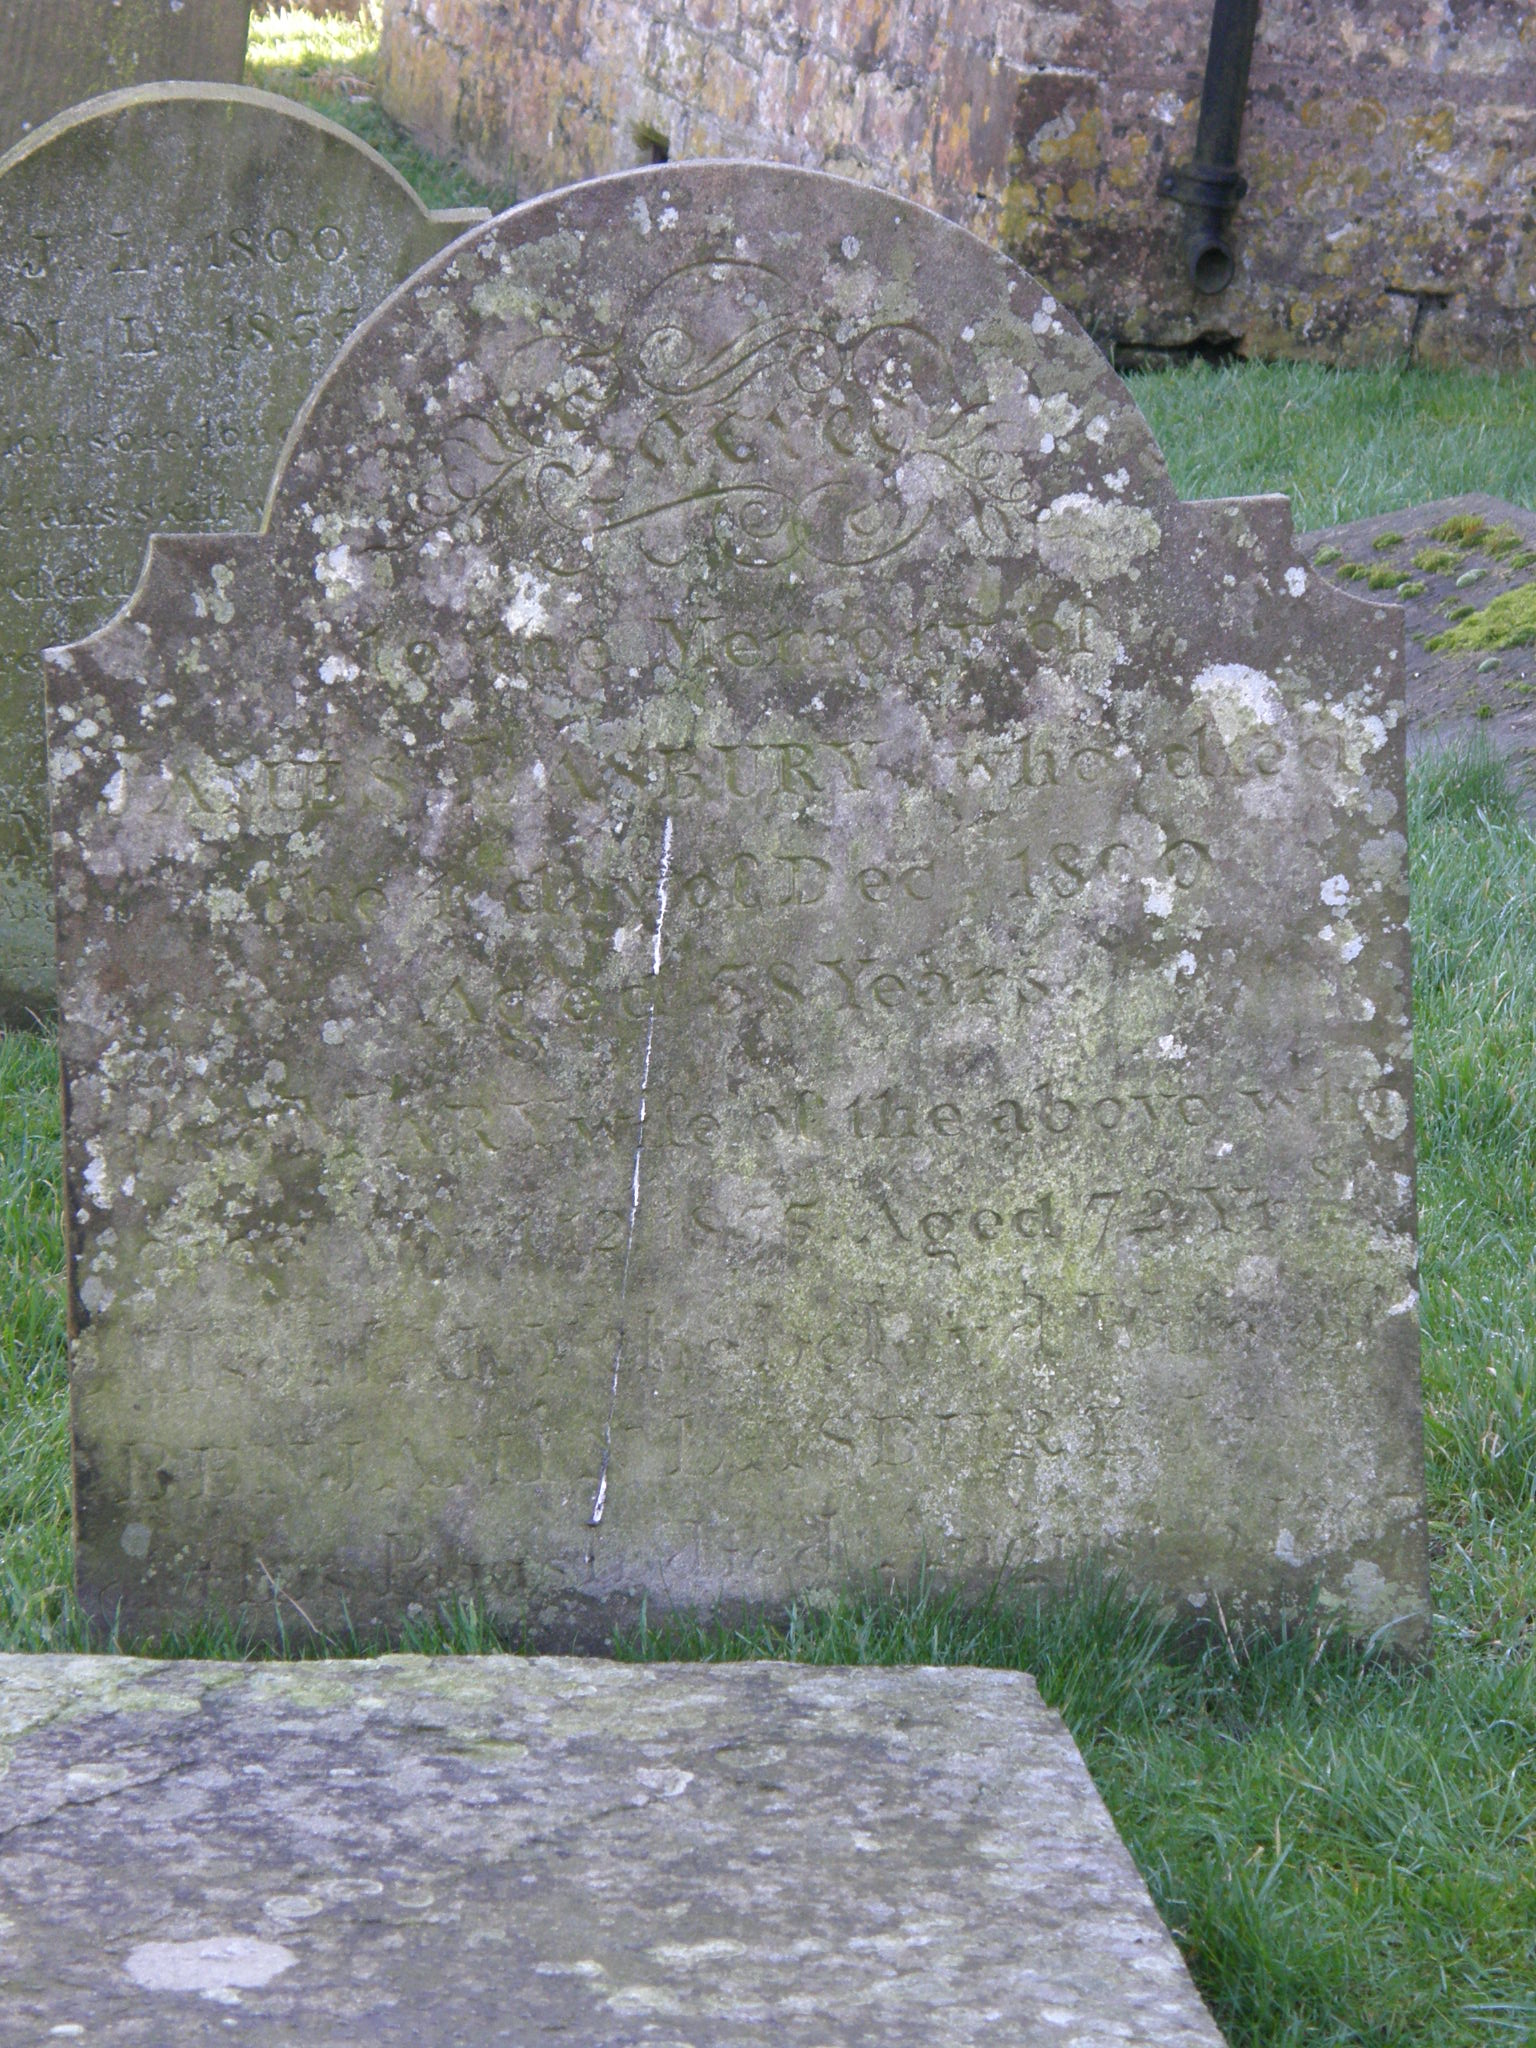 Gravestone of James Lasbury, wife Mary (neé Burge) who died in 1833 aged 72 and Benjamin